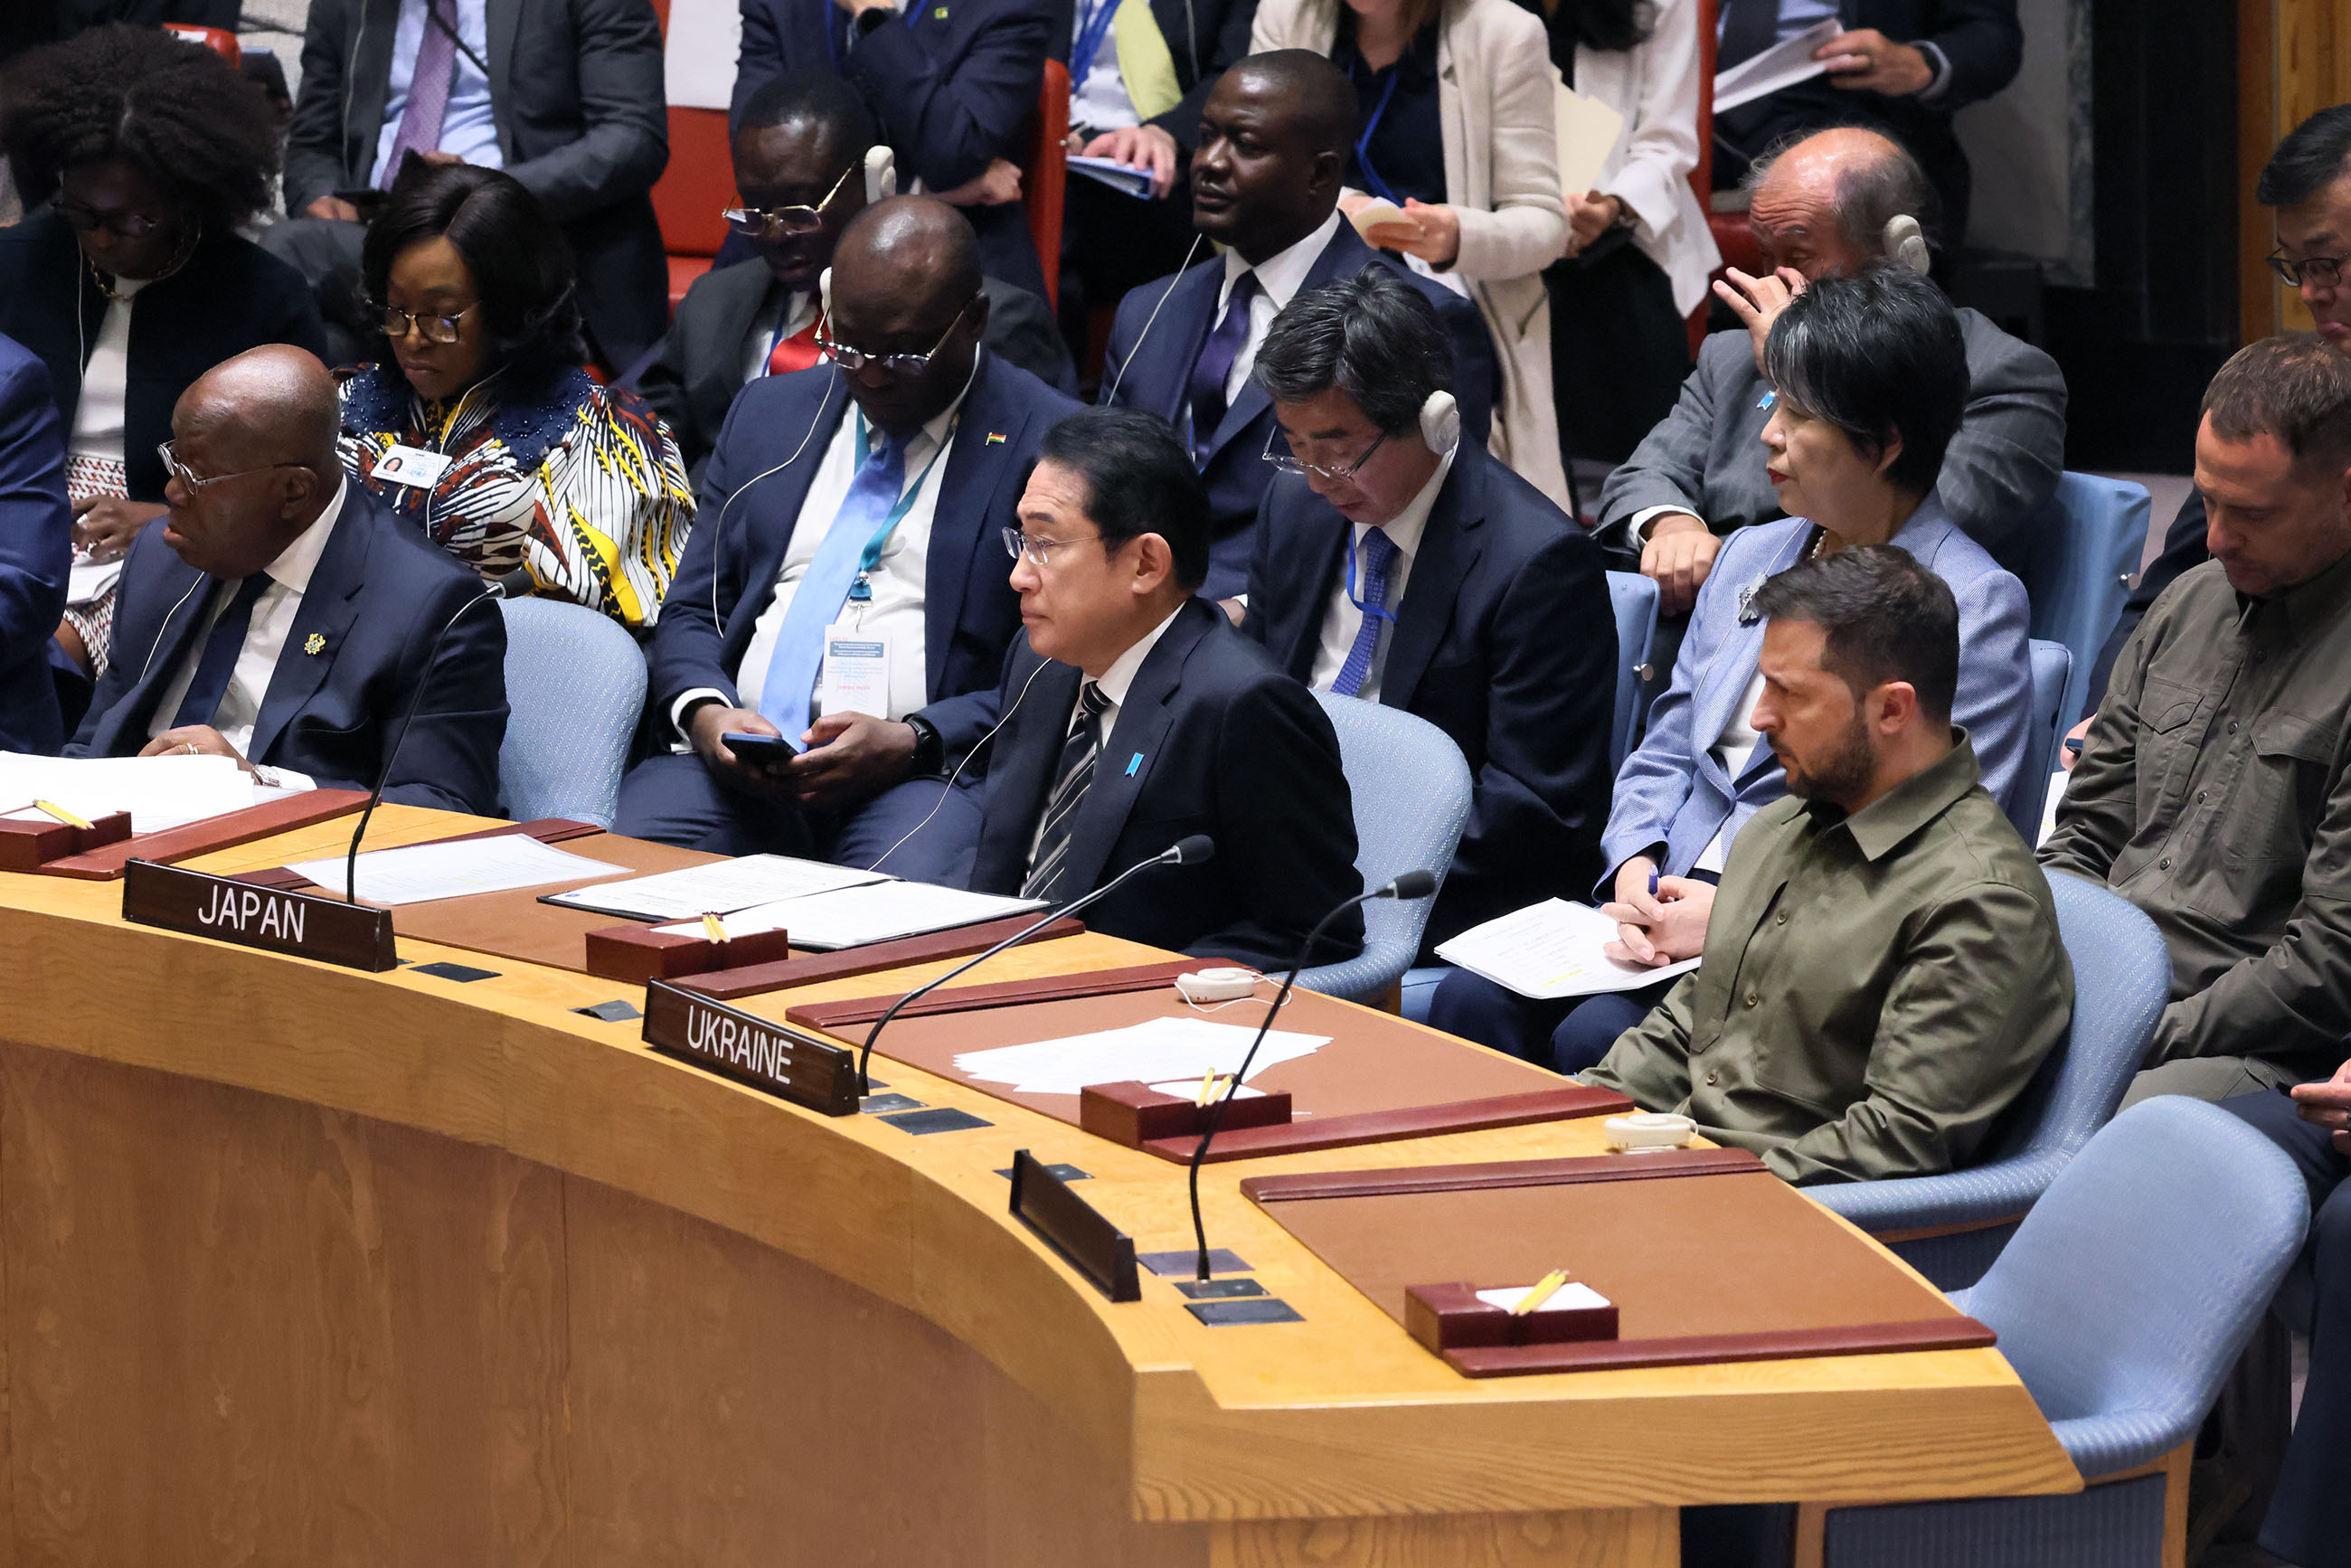 Prime Minister Kishida attending the Security Council High Level Open Debate on “Upholding the purposes and principles of the UN Charter through effective multilateralism: maintenance of peace and security of Ukraine” (2)